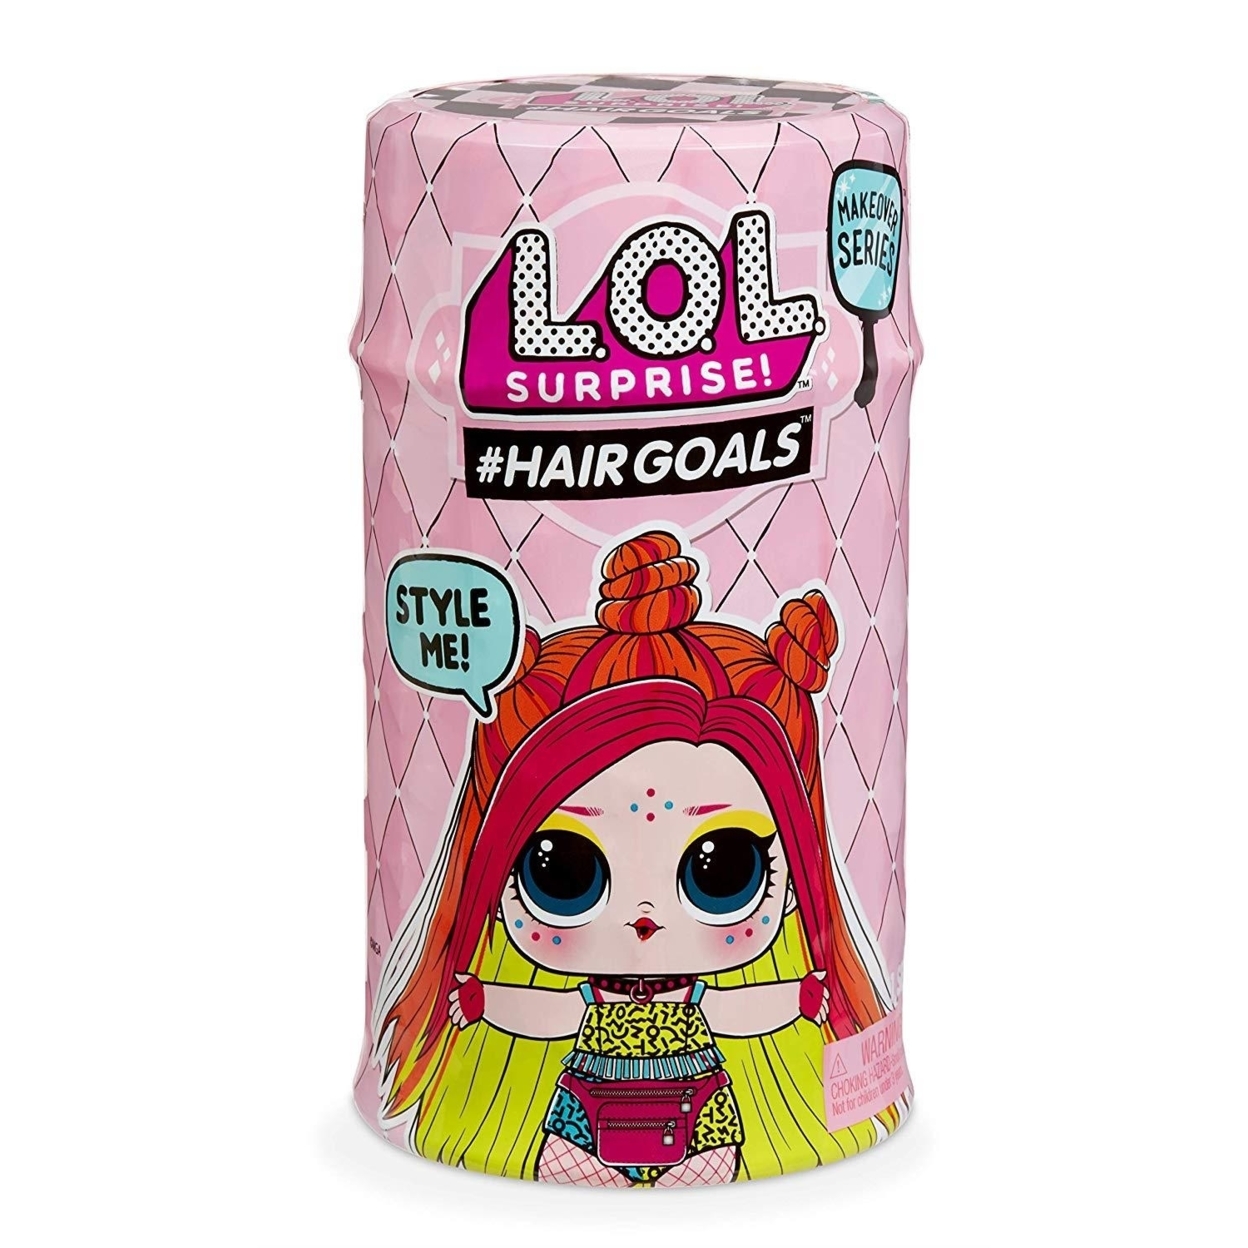 LOL Surprise Makeover Series 2 #Hairgoals Real Hair w/ 15 Surprises, Great Gift for Kids Ages 4 5 6+ - image 1 of 5